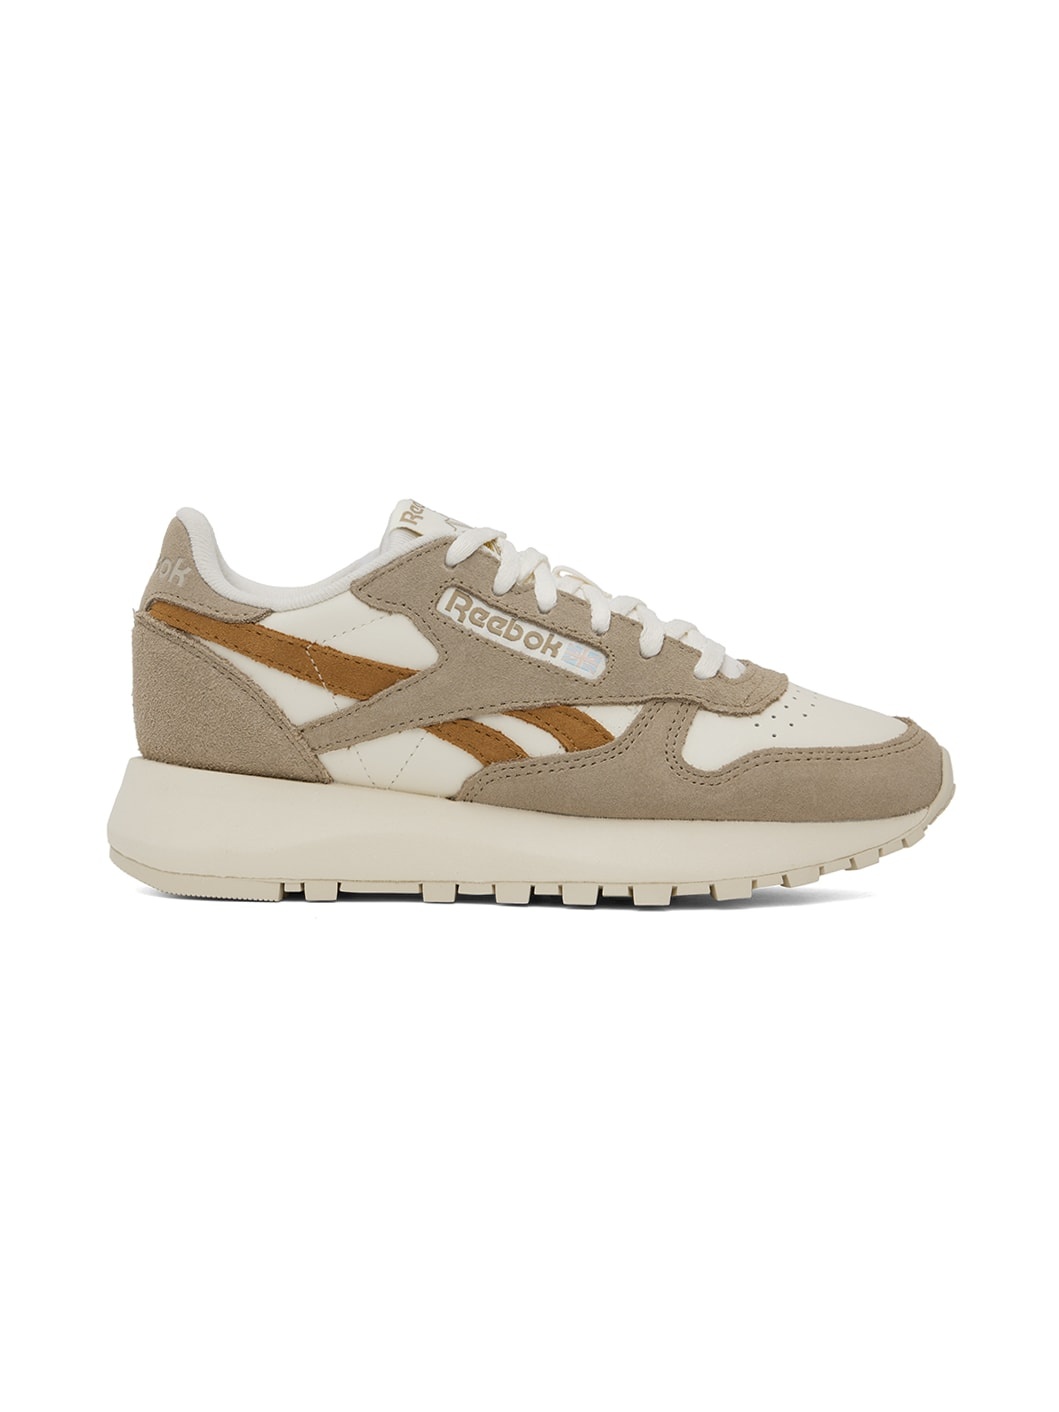 White & Beige Classic Sneakers - 1